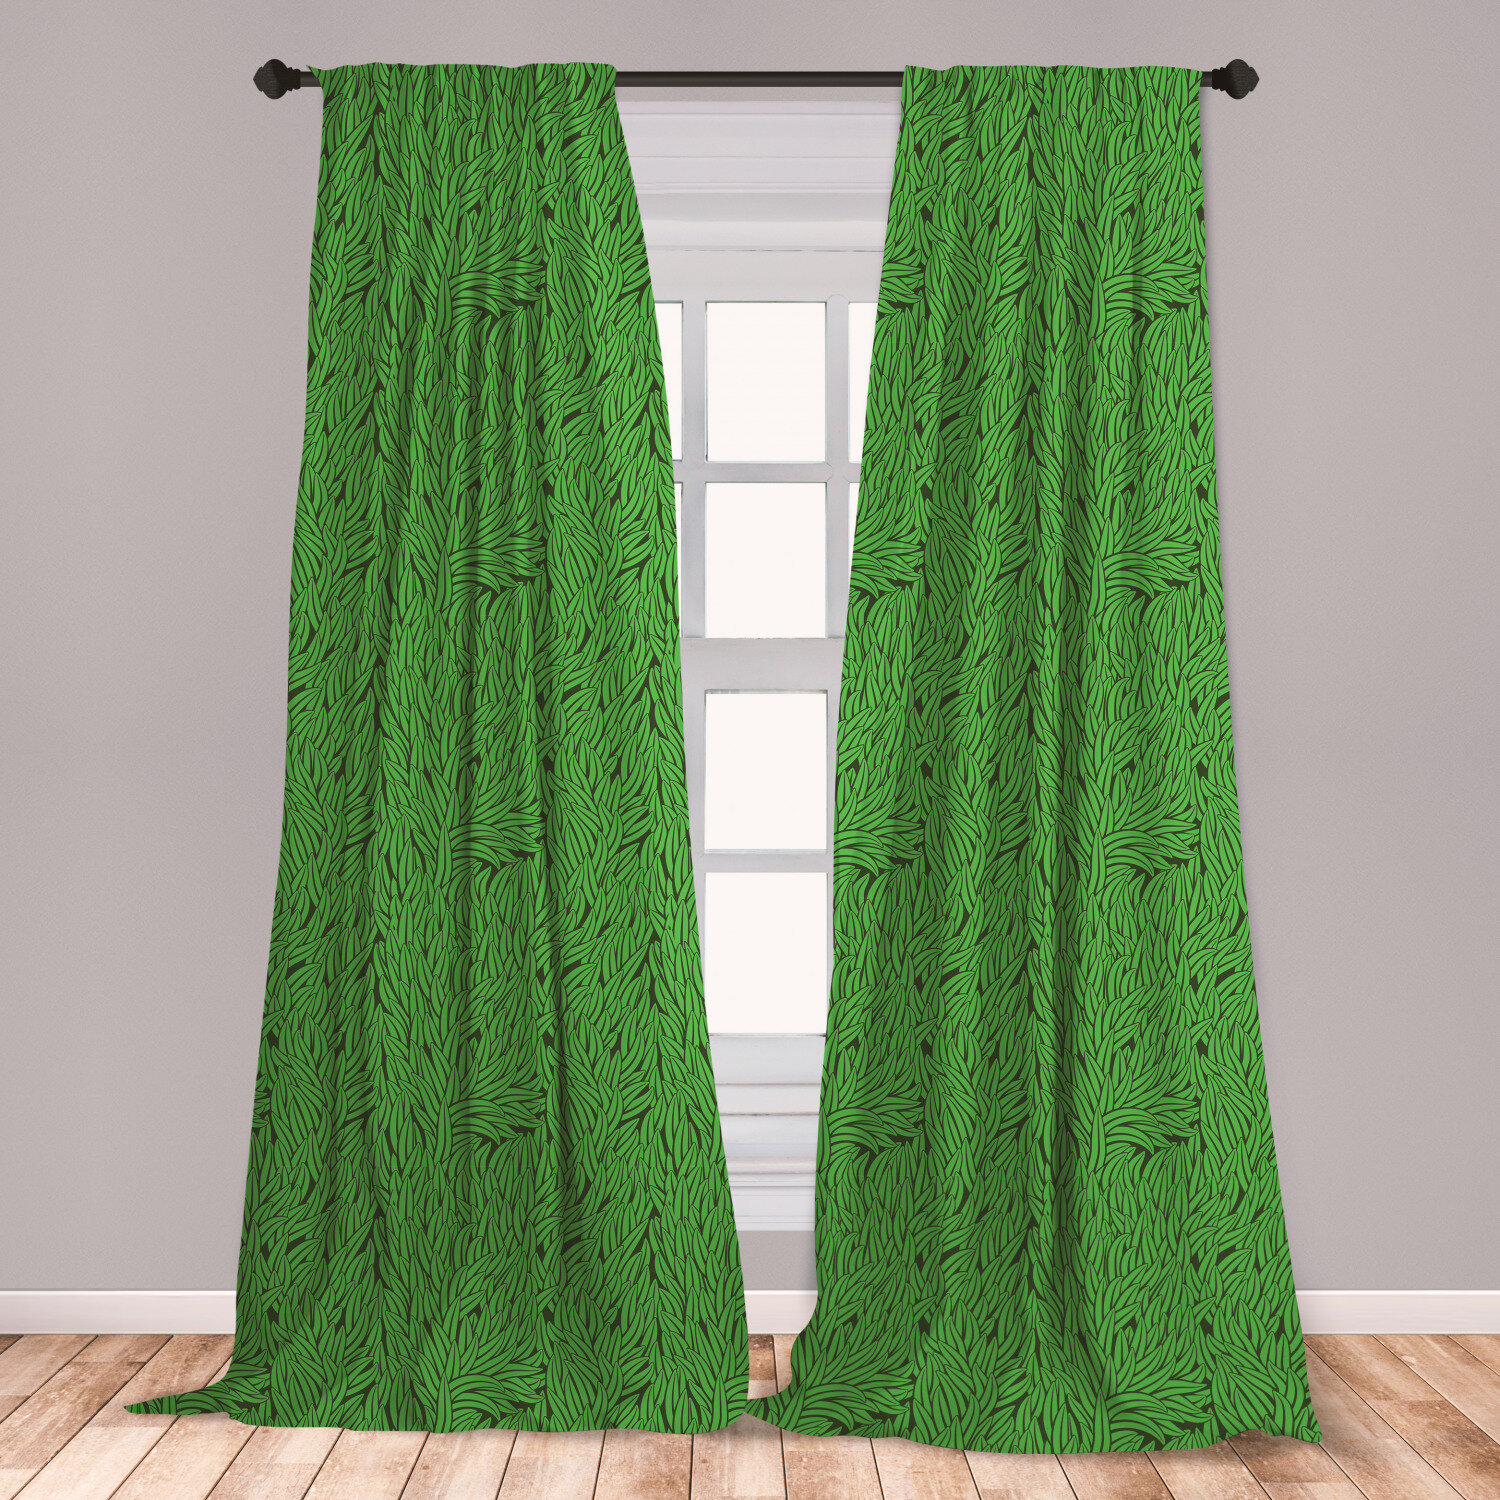 Luxury lime green window valance East Urban Home Almandine Green Curtains Hand Drawn Style Grass Pattern Abstract Simplistic Environmental Growth Eco Window Treatments 2 Panel Set For Living Room Bedroom Decor 56 X 63 Lime Emerald Wayfair